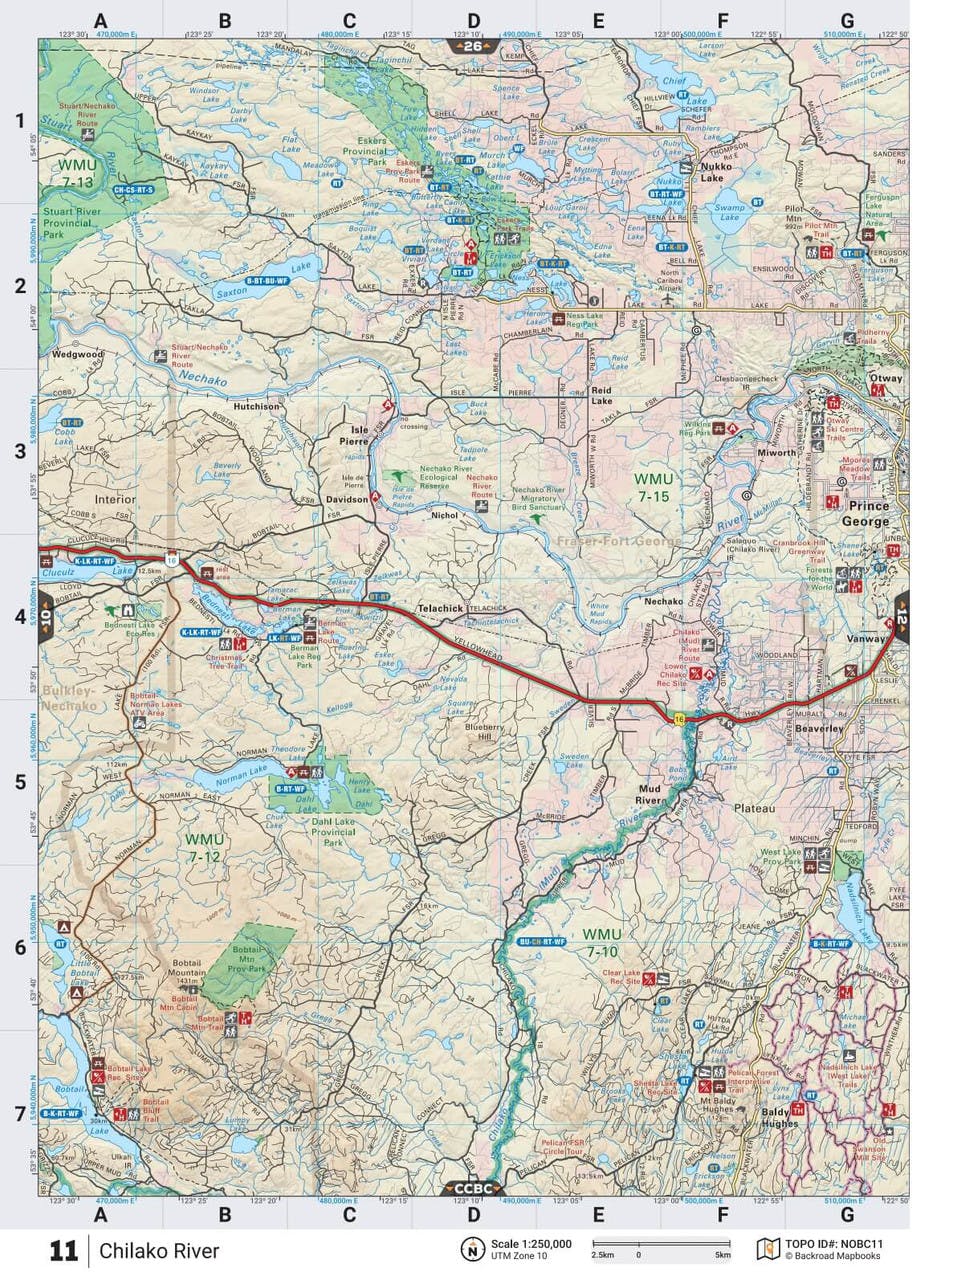 Northern BC Mapbook NO_COLOUR